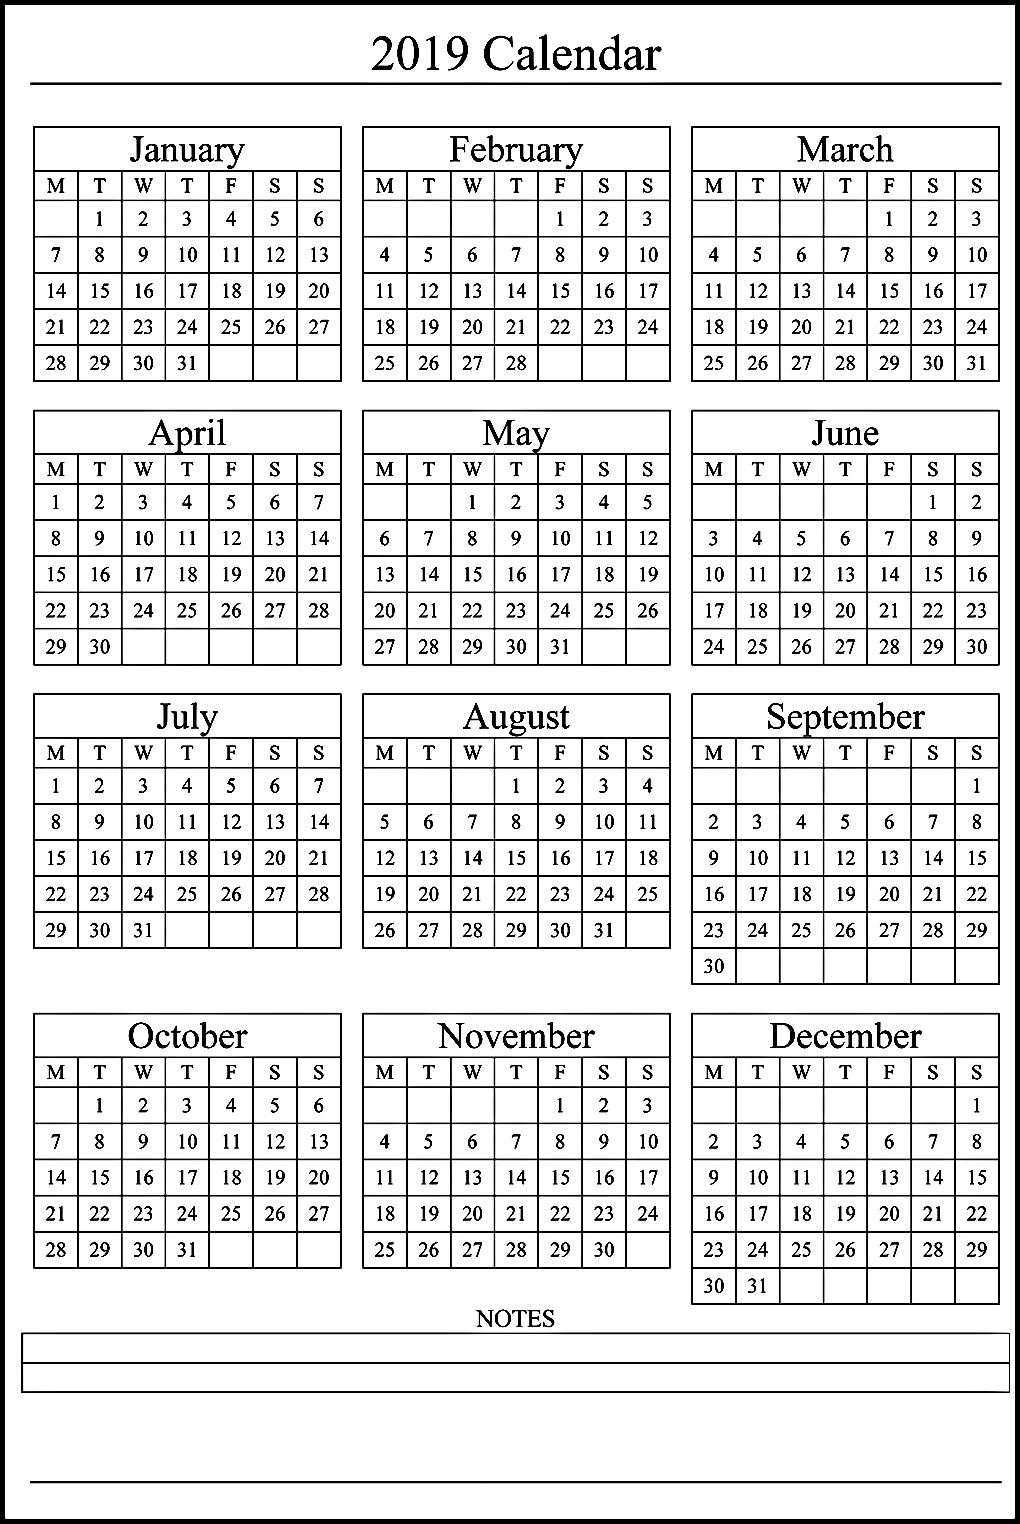 12 Month Calendar On One Page #2019Calendar Remarkable 4 Months On One Page Calendar